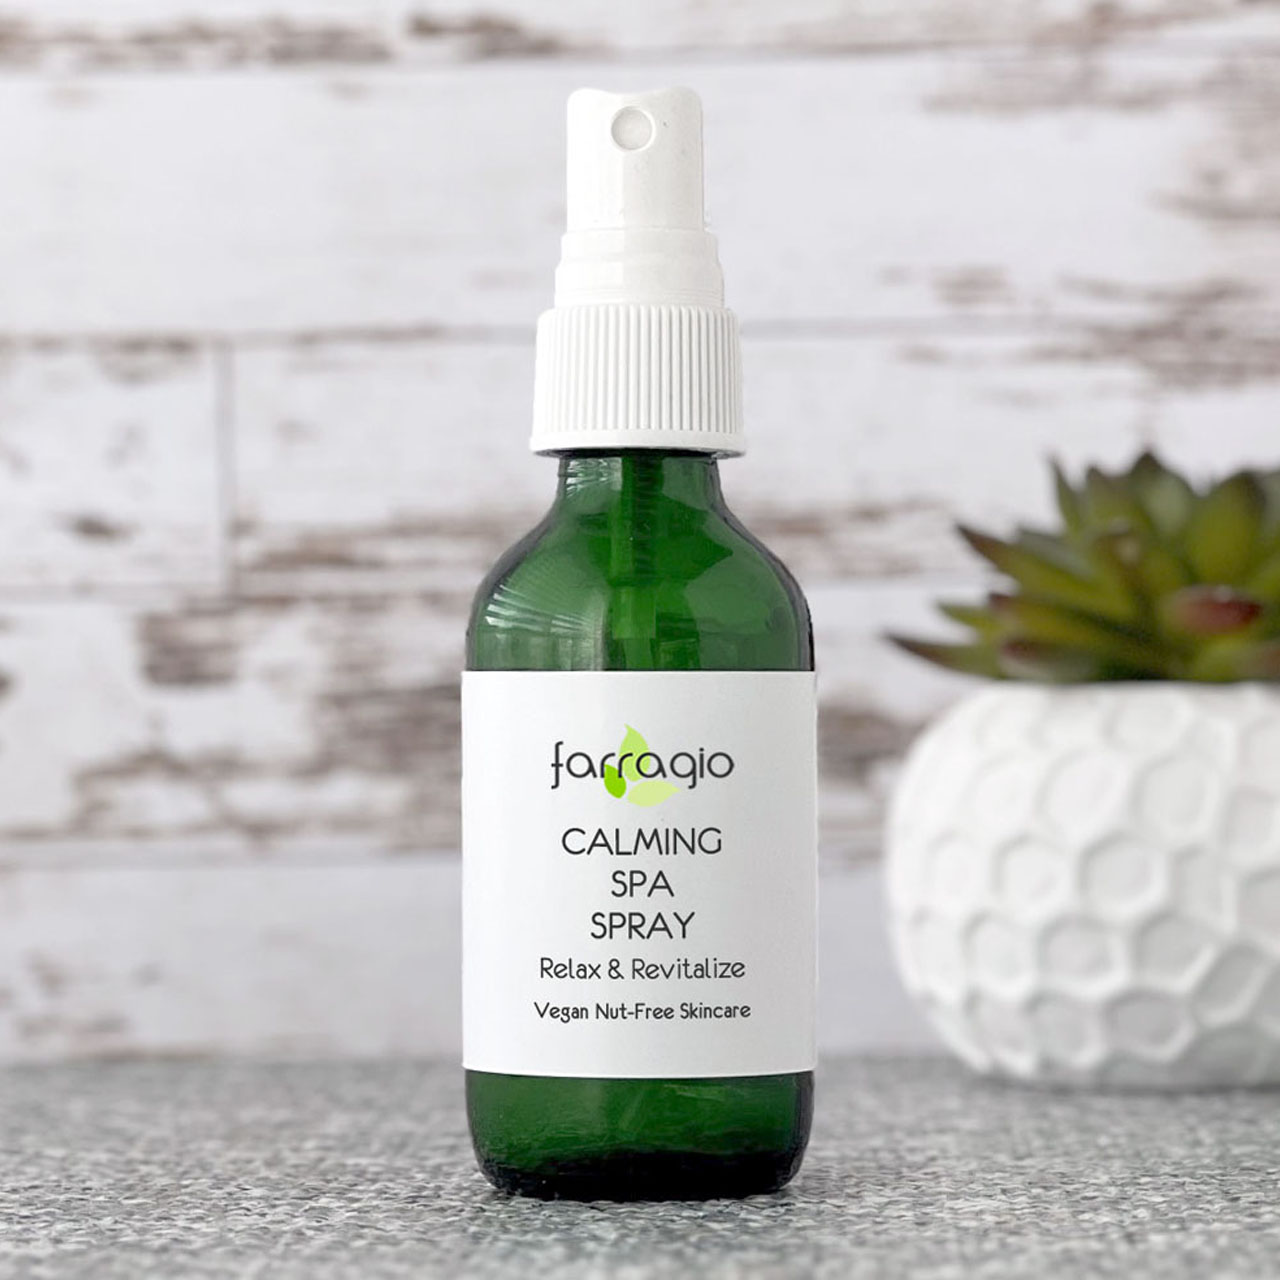 green glass bottle of all natural makeup setting spray